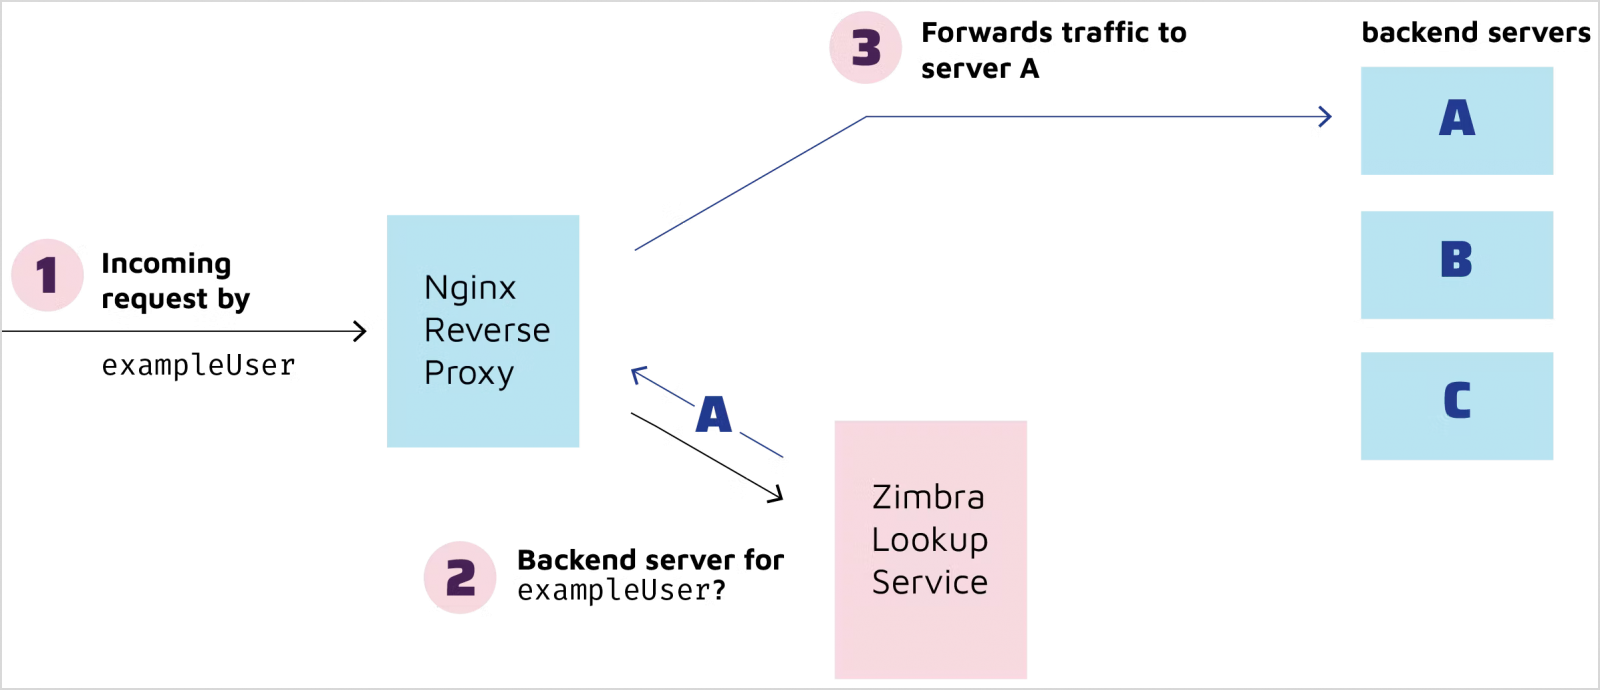 Zimbra's request routing diagram